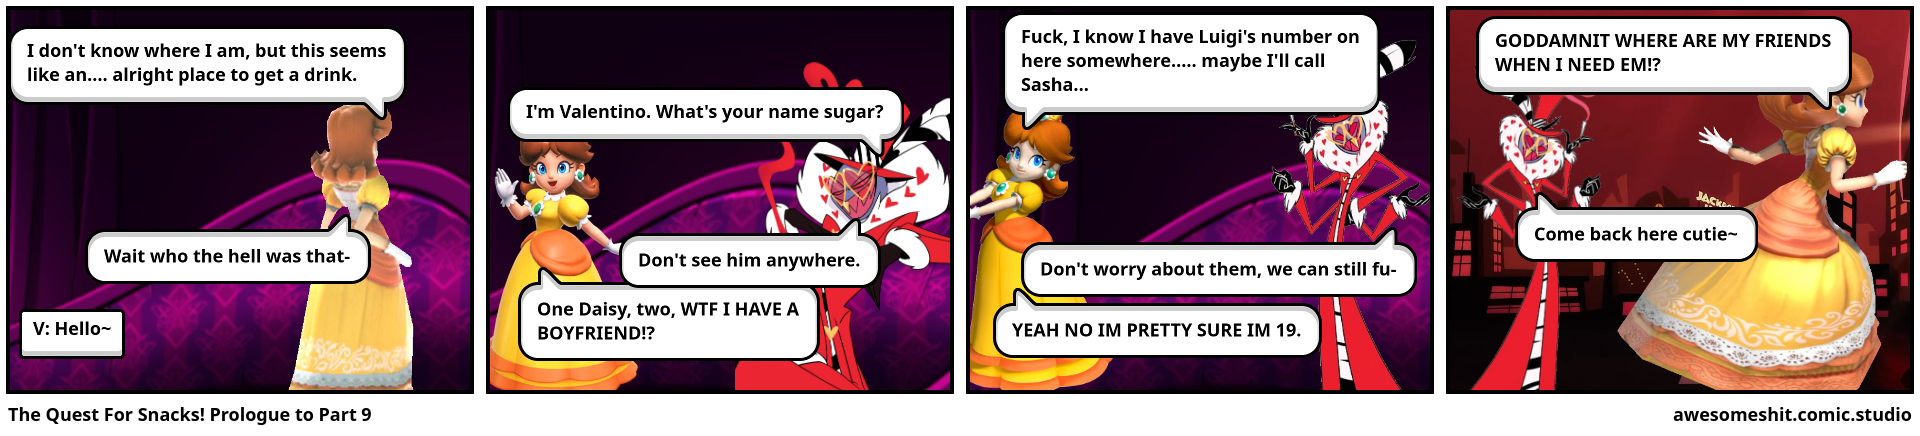 The Quest For Snacks! Prologue to Part 9